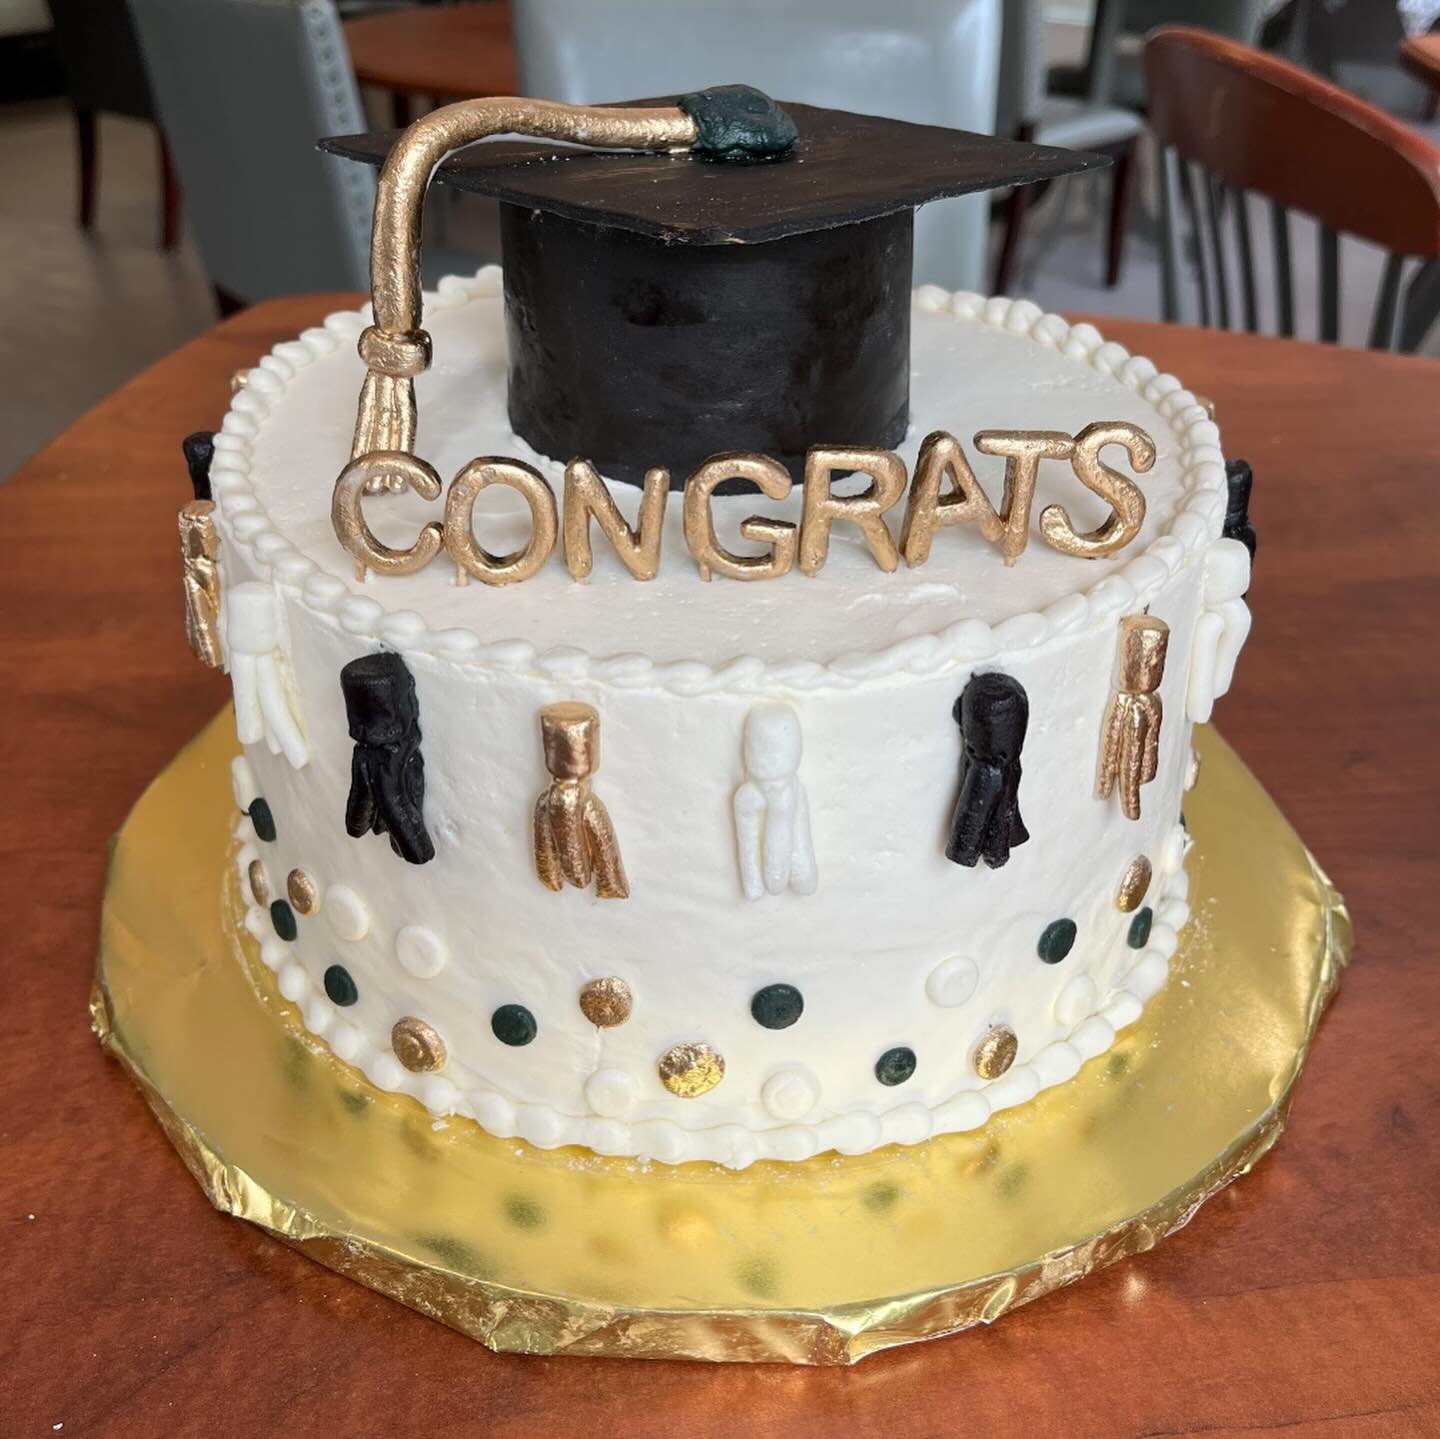 Graduation season is almost here! Order your custom cakes, cookies and more from @edibleartbakeryraleigh for all your upcoming celebrations! 🎓 #supportLocal